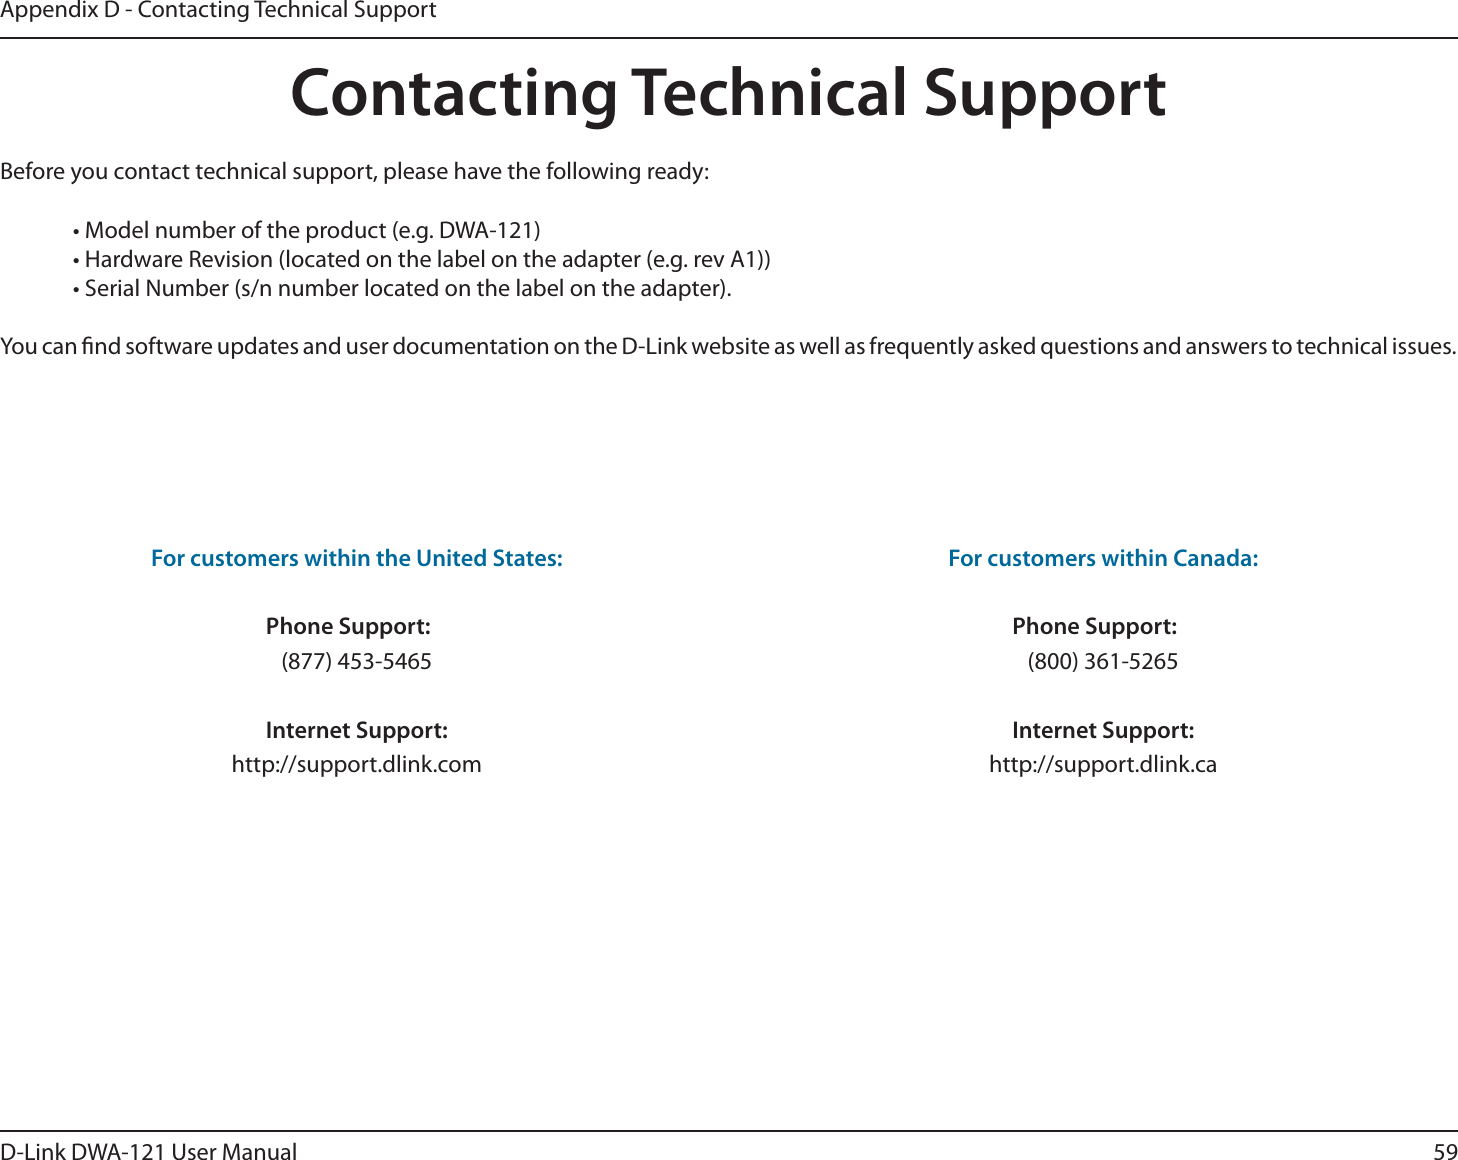 59D-Link DWA-121 User ManualAppendix D - Contacting Technical SupportContacting Technical SupportBefore you contact technical support, please have the following ready:  • Model number of the product (e.g. DWA-121)  • Hardware Revision (located on the label on the adapter (e.g. rev A1))  • Serial Number (s/n number located on the label on the adapter). You can nd software updates and user documentation on the D-Link website as well as frequently asked questions and answers to technical issues.For customers within the United States: Phone Support: (877) 453-5465 Internet Support: http://support.dlink.com For customers within Canada: Phone Support: (800) 361-5265   Internet Support: http://support.dlink.ca 